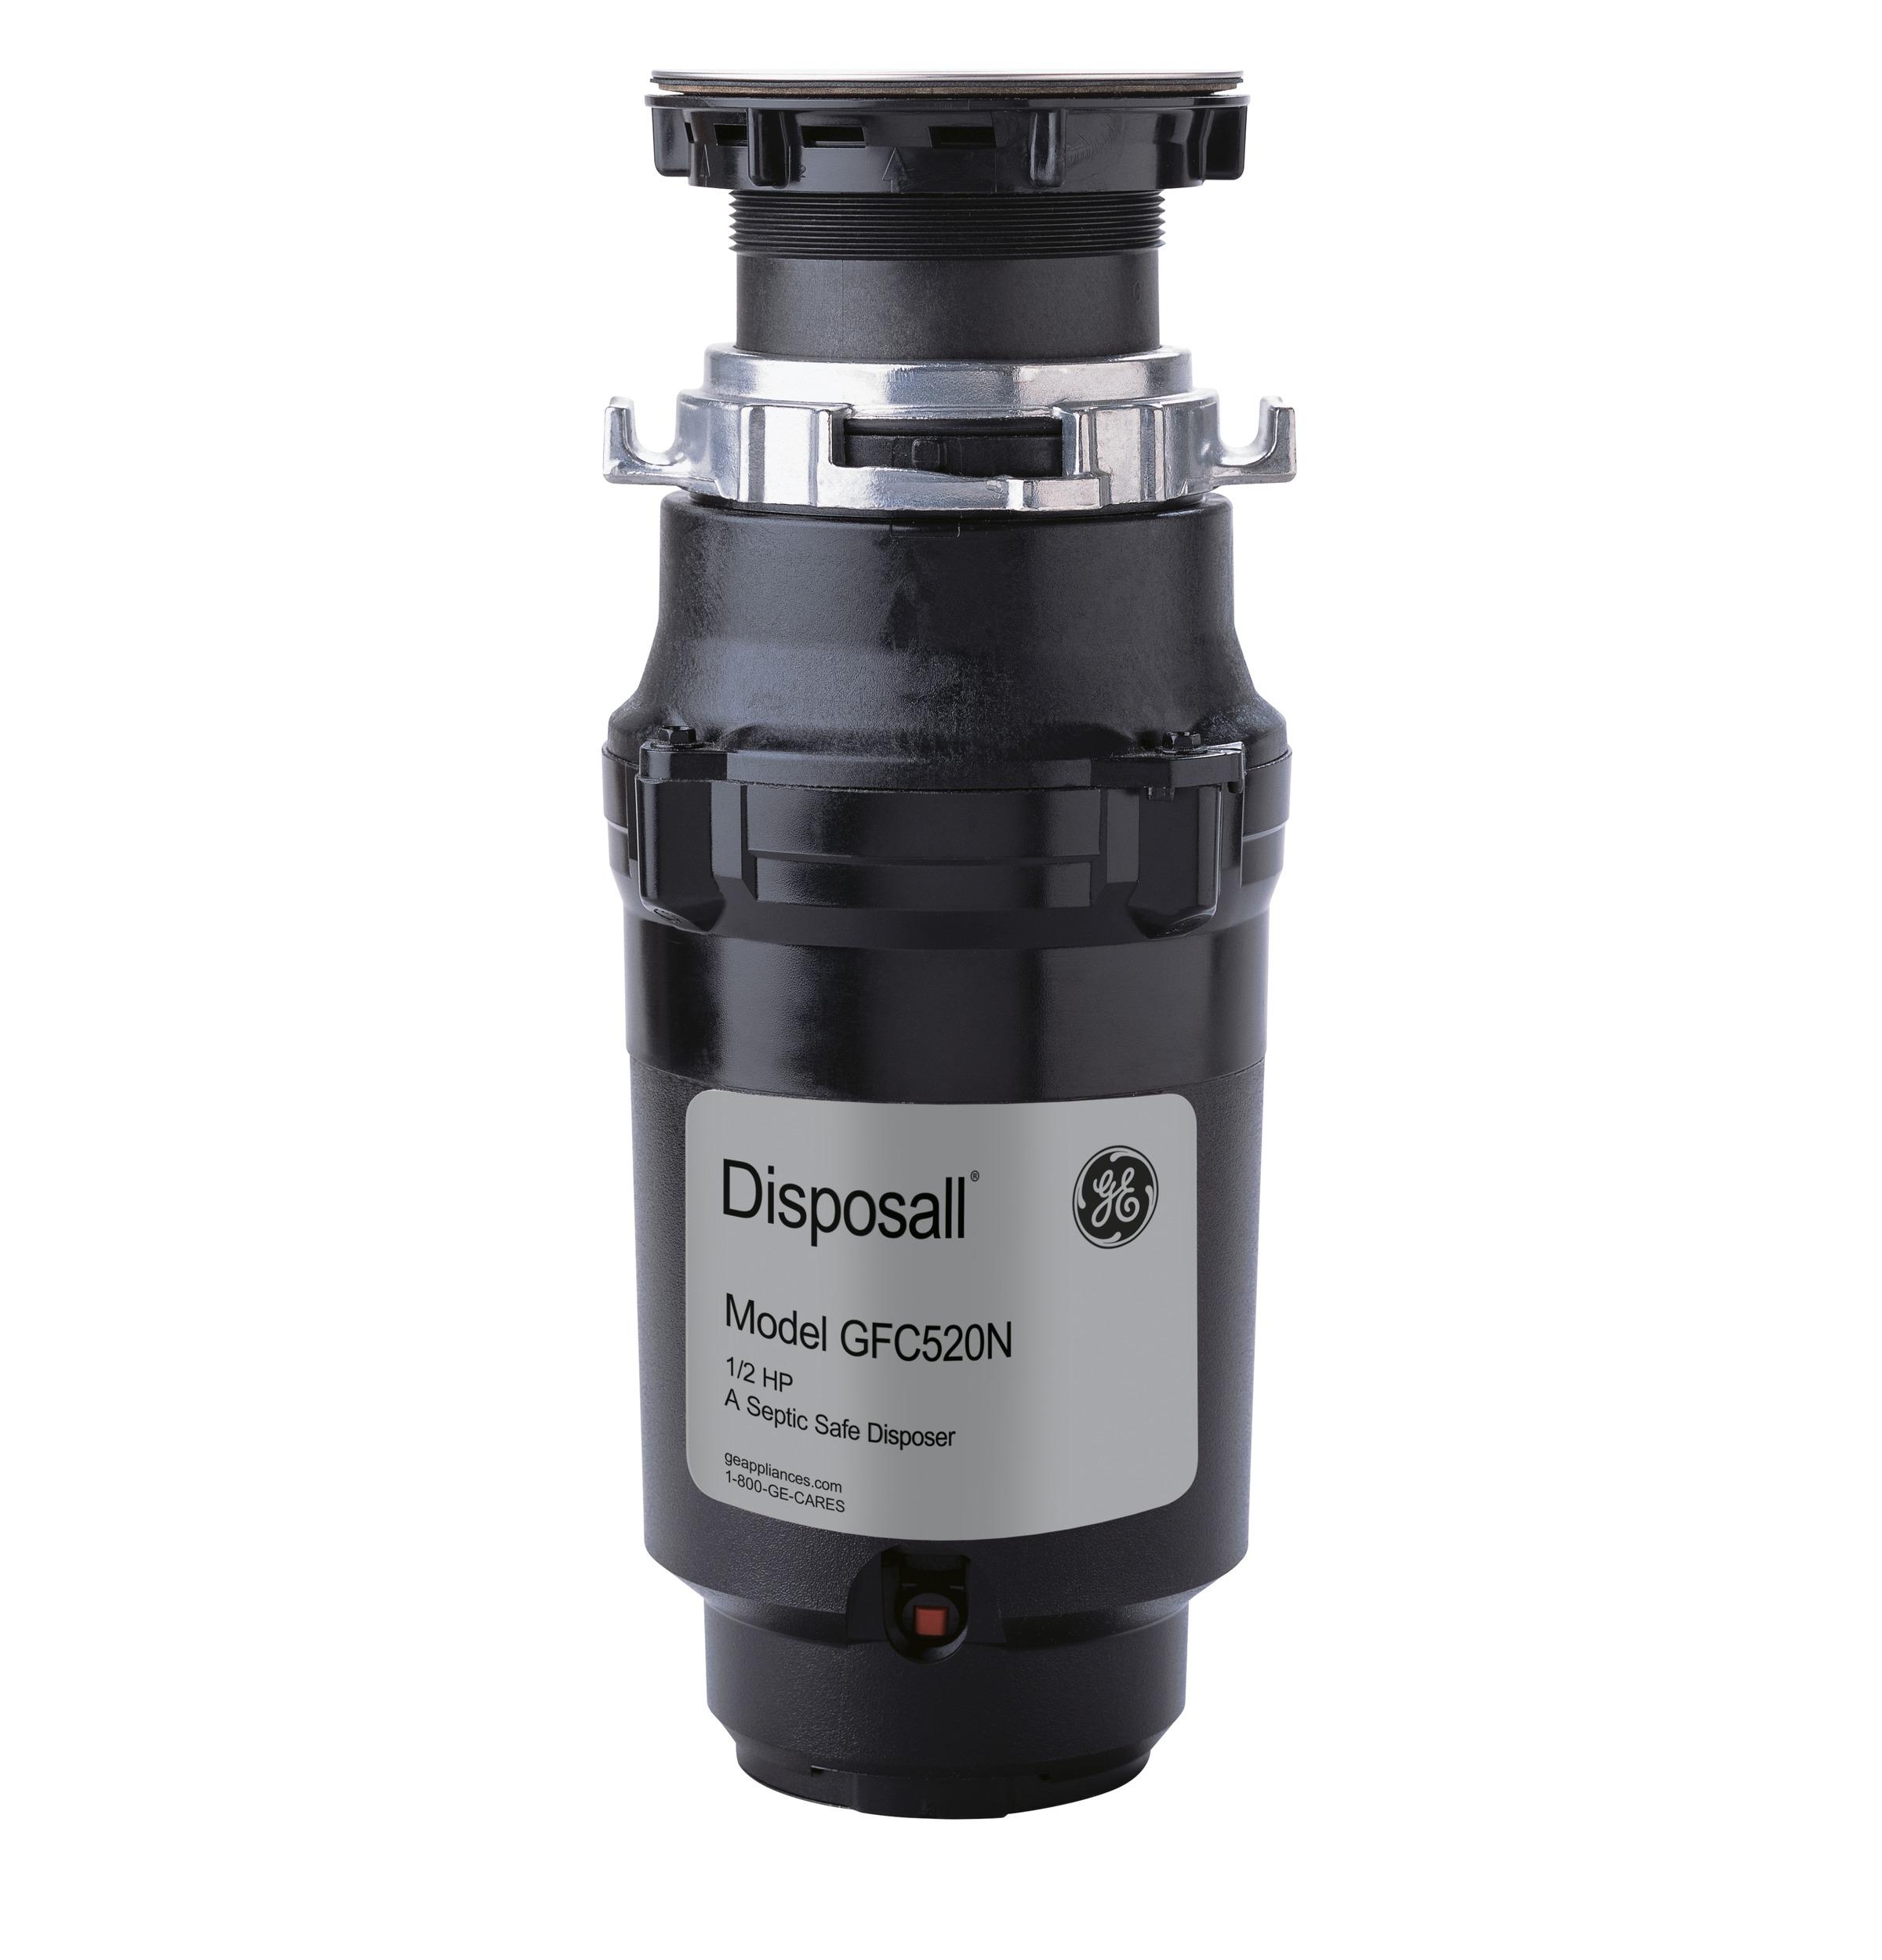 GE DISPOSALL® 1/2 HP Continuous Feed Garbage Disposer - Non-Corded